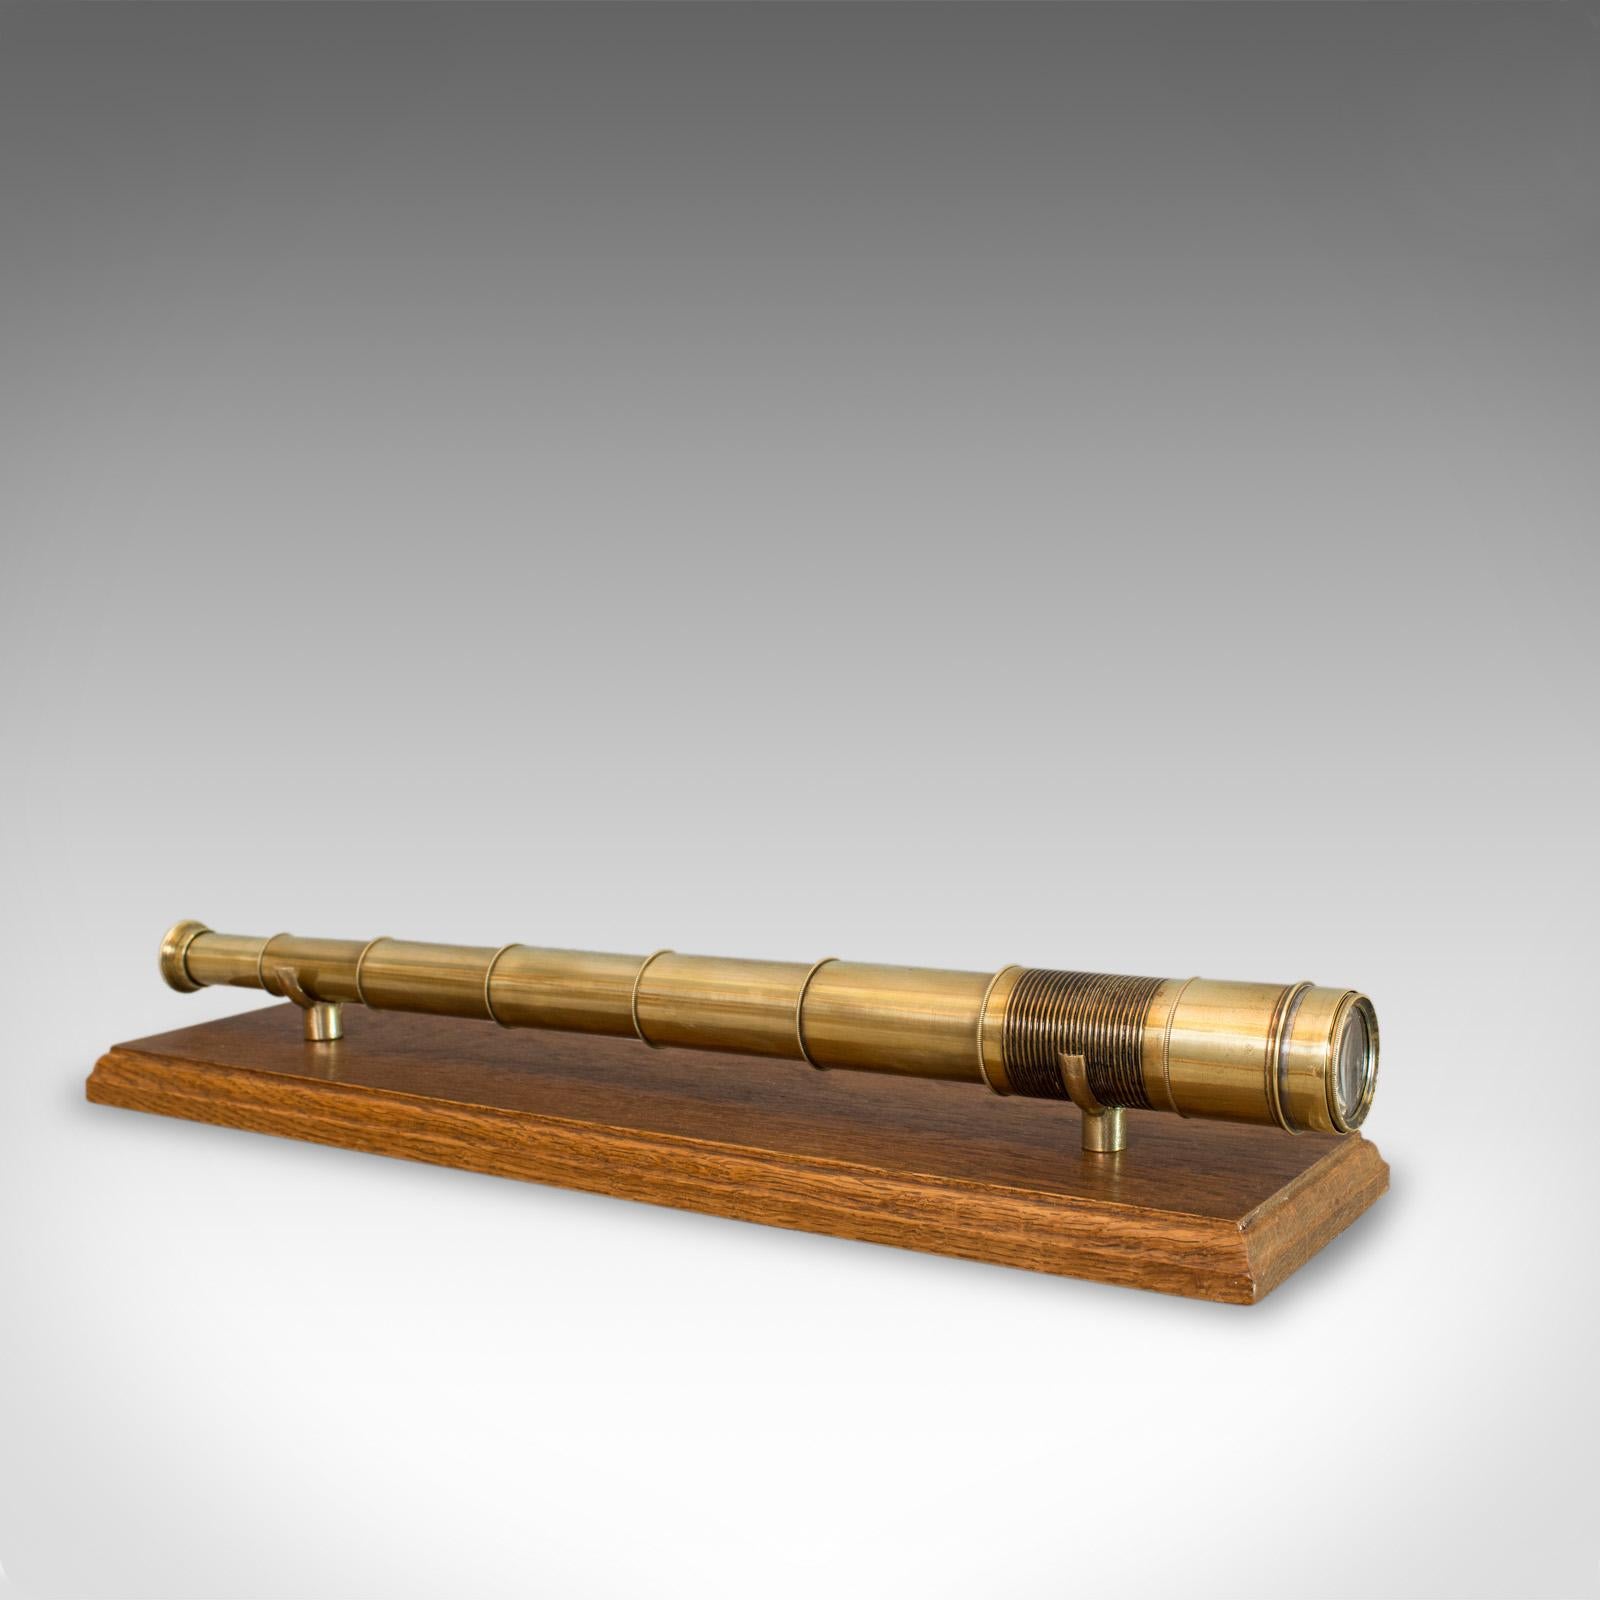 This is an antique pocket telescope. An English, brass six draw refractor for terrestrial or astronomical use dating to the mid-19th century, circa 1840.

Perfect for bird watching, landscape appreciation, wildlife stalking, or maritime